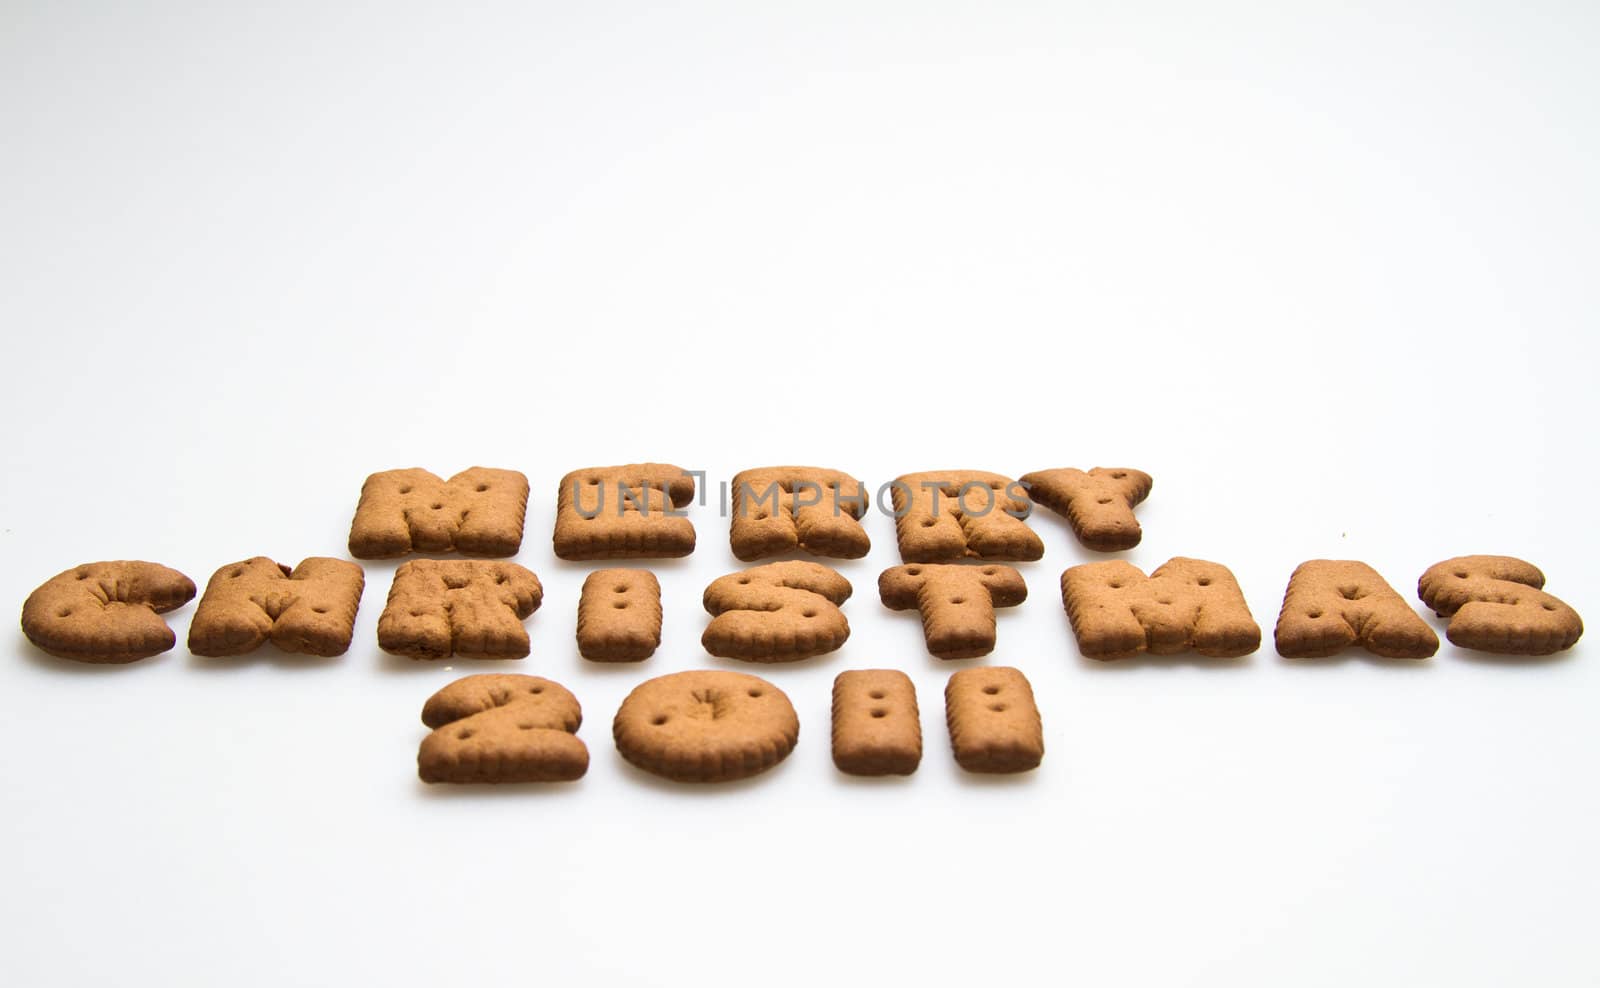 Merry Christmas wording from brown biscuits on white background laying in landscape orientation